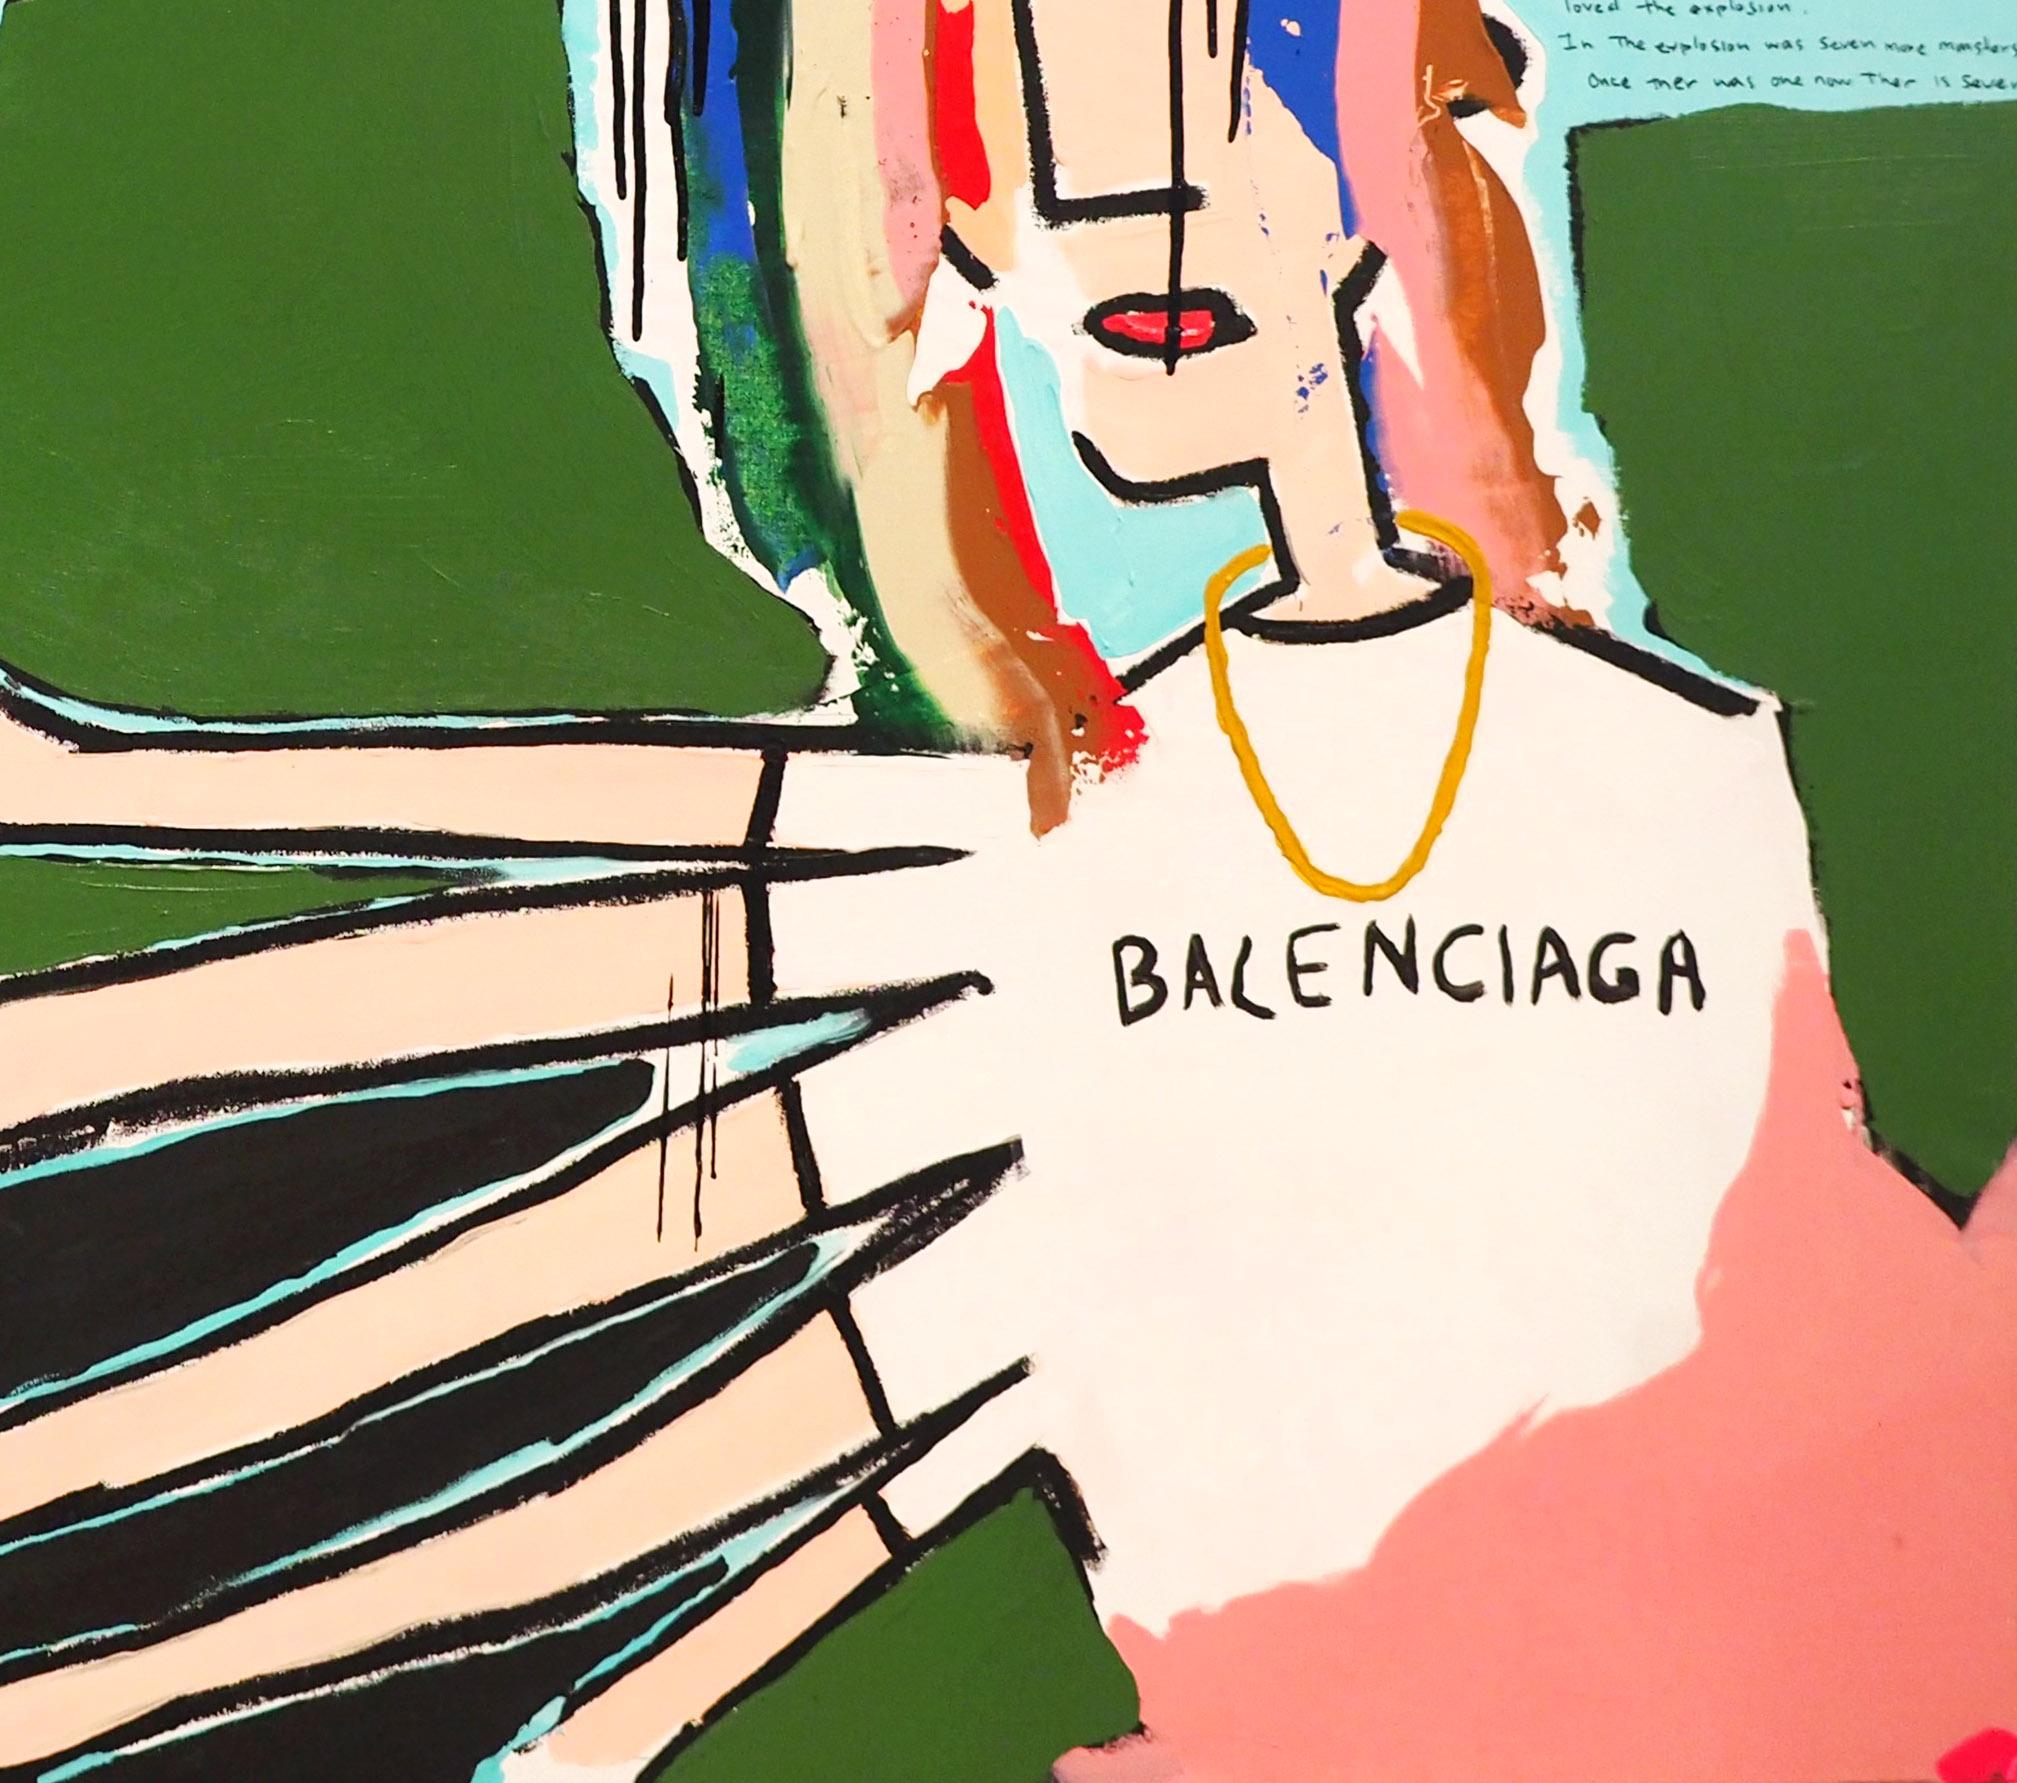 Abigail portrays a minimalistic character in a green background wearing a Balenciaga shirt and rainbow hair. Multiple arms holding cigarettes with colorful tears dripping down their face suggest themes of songs and storytelling. Using bold,